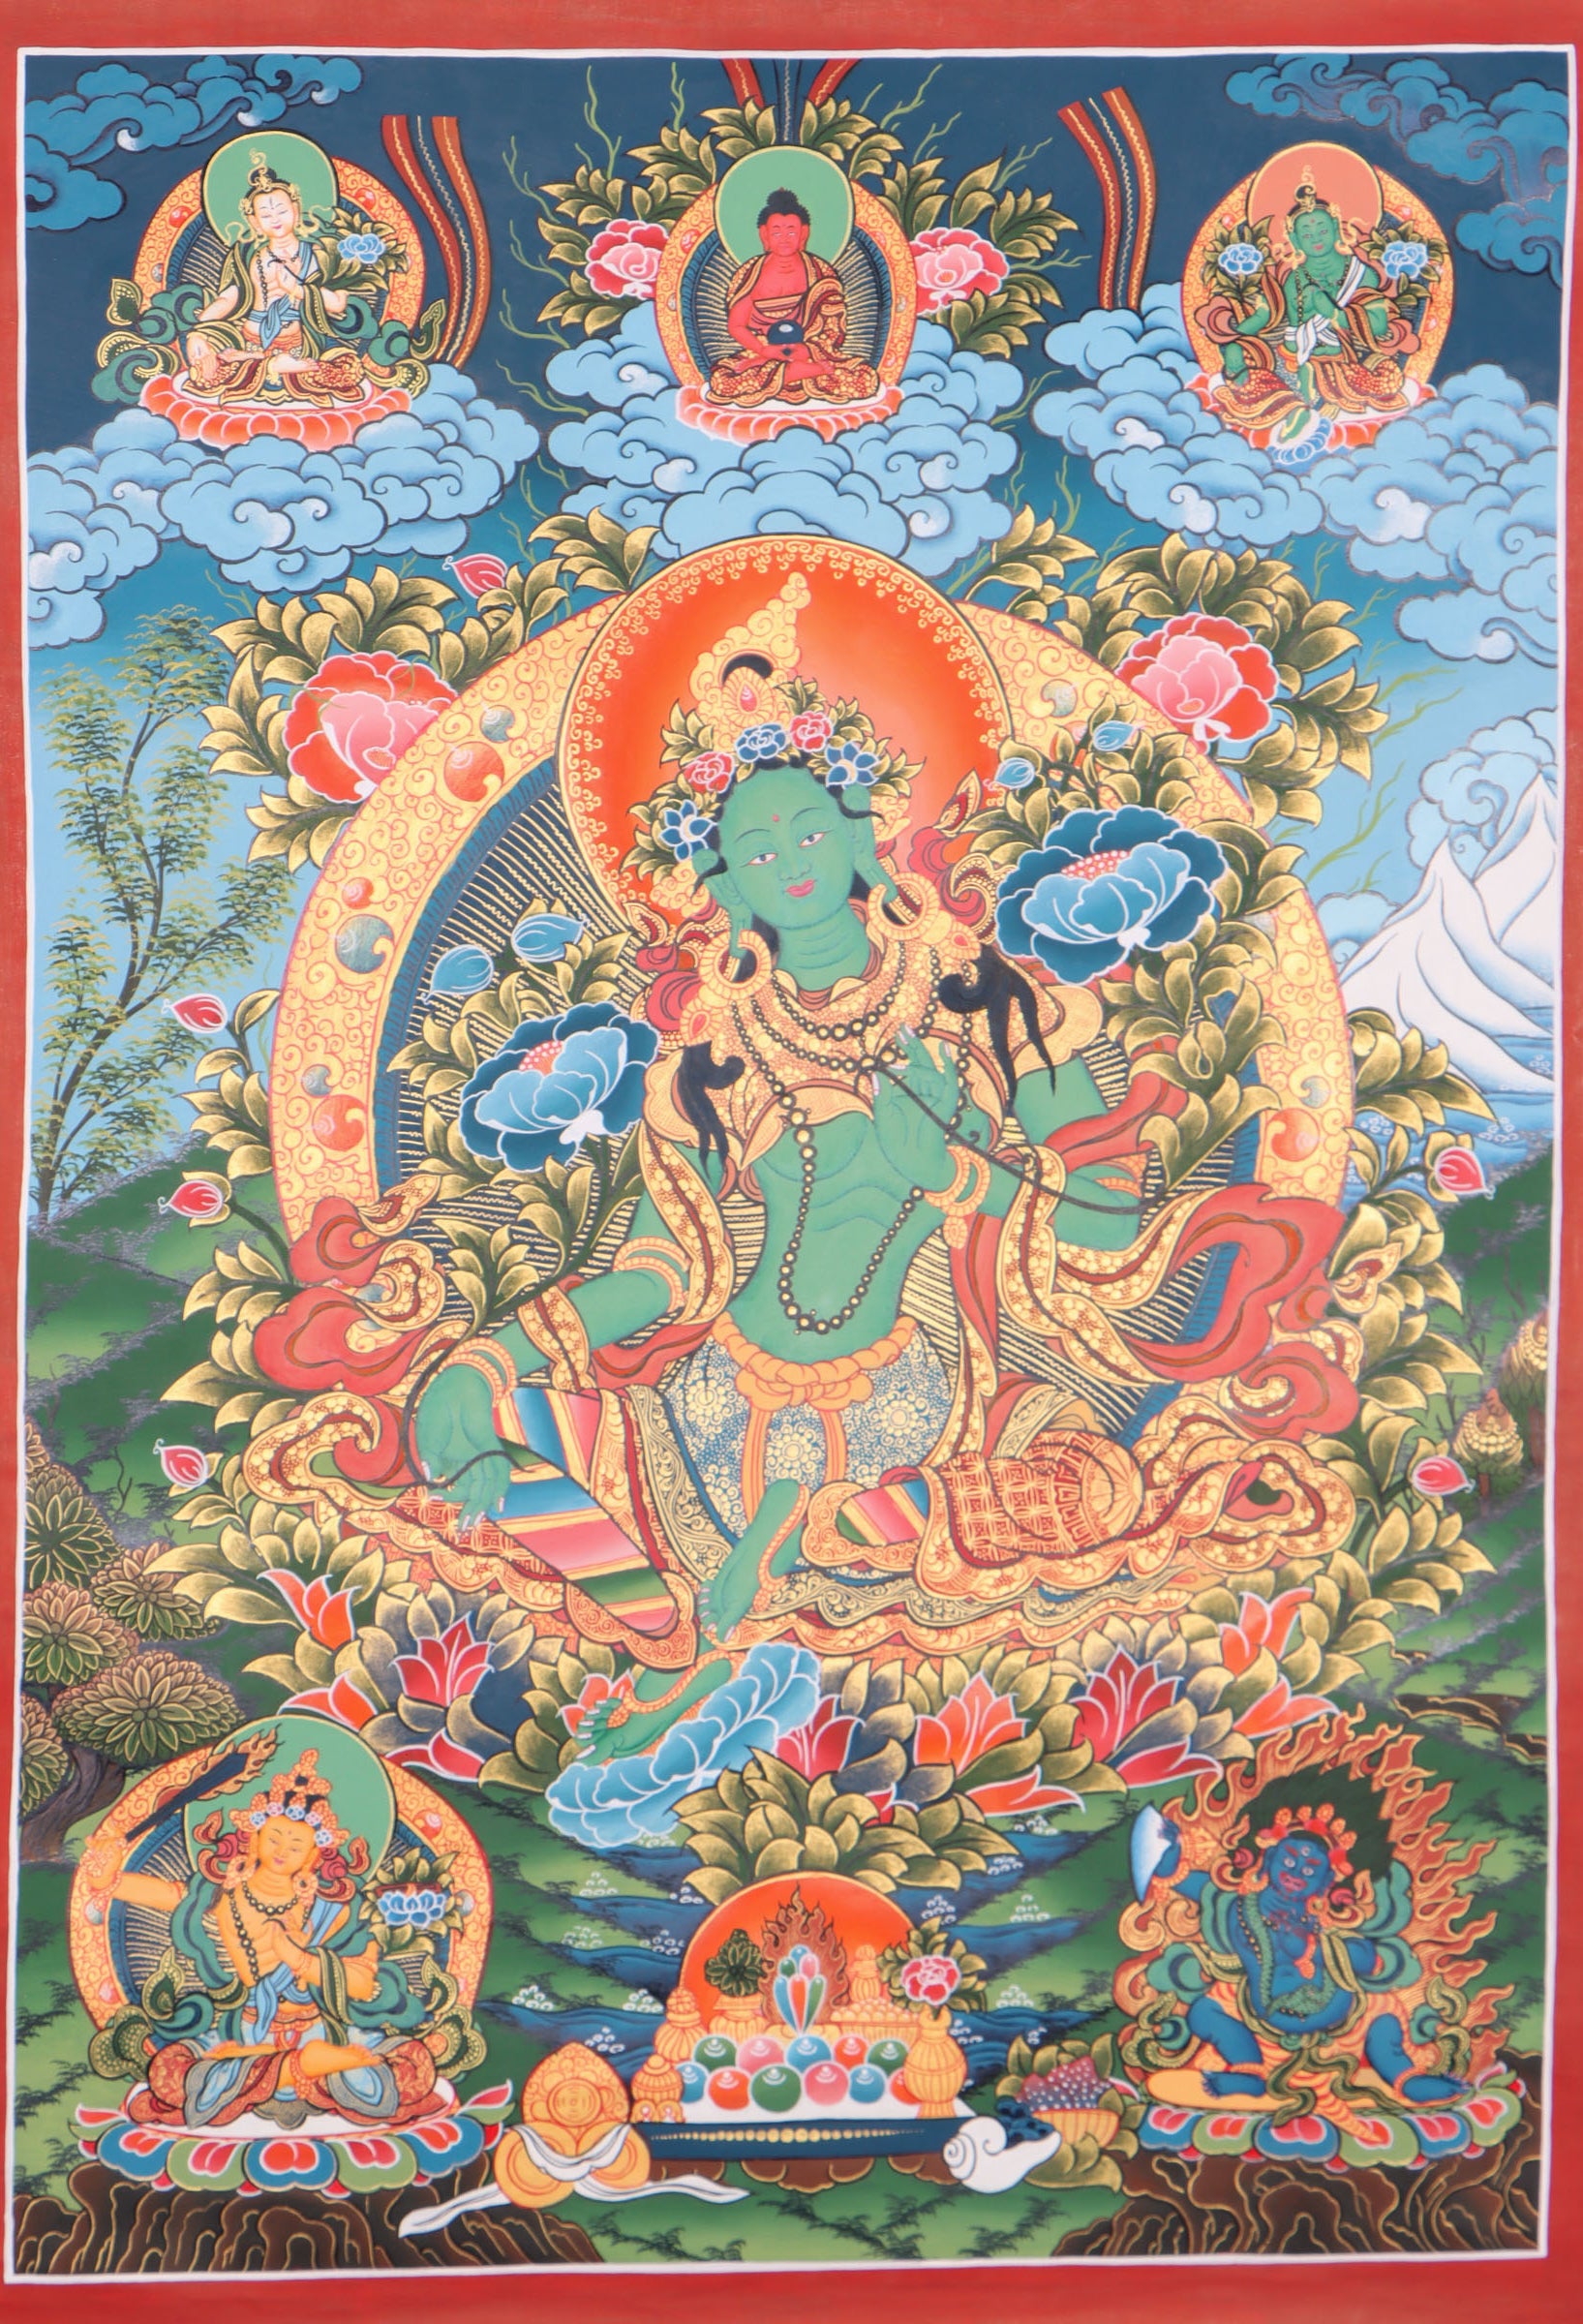 Green Tara Thangka Painting  for wisdom and compassion.